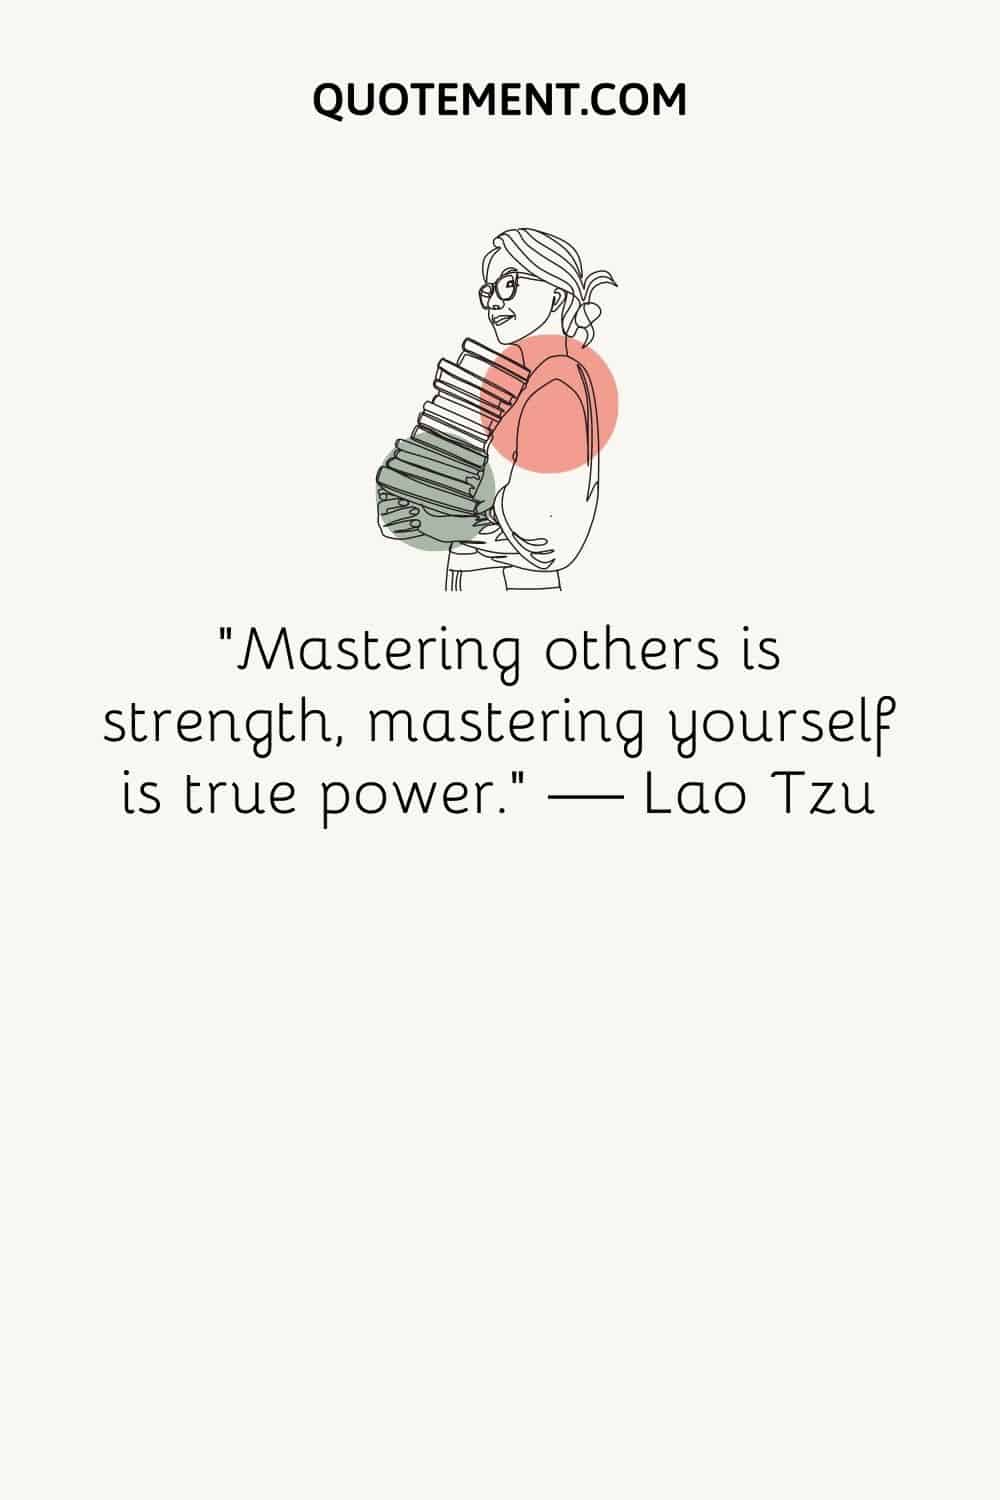 “Mastering others is strength, mastering yourself is true power.” ― Lao Tzu